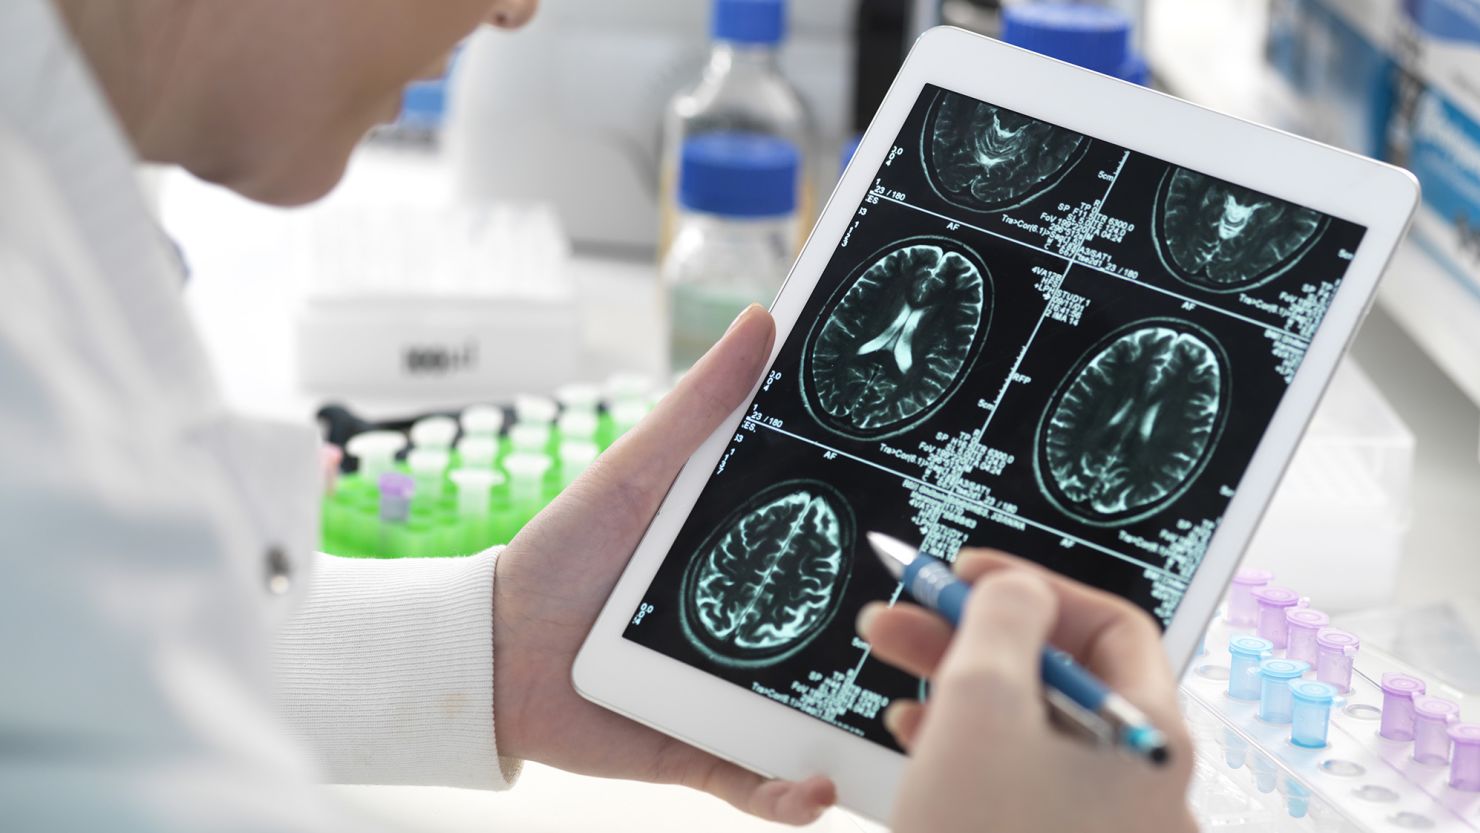 Doctor viewing patient's brain scan on digital tablet in laboratory - stock photo